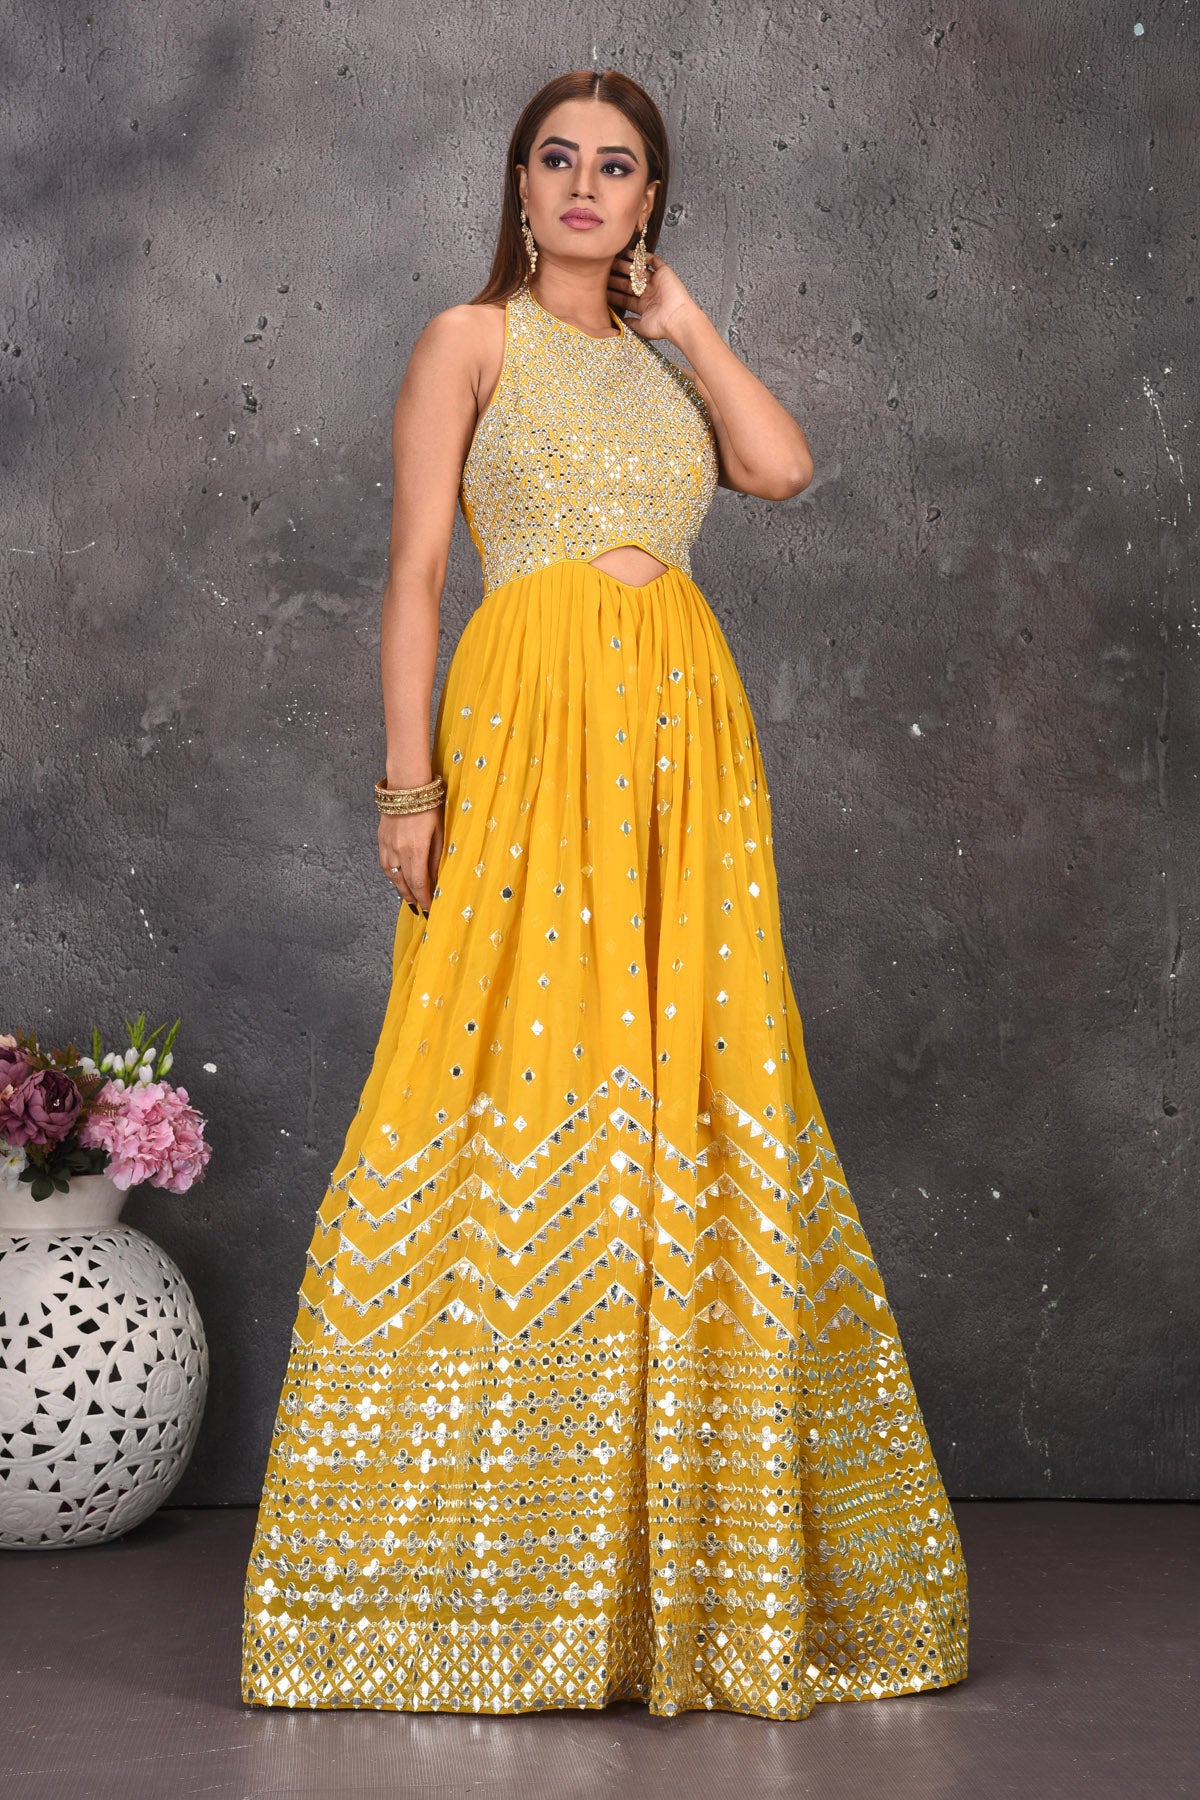 Shop beautiful yellow halter neck mirror embroidery jumpsuit online in USA. Look stylish at parties and wedding festivities in designer dresses, Indowestern outfits, Anarkali suits, wedding lehengas, palazzo suits, sharara suits from Pure Elegance Indian clothing store in USA.-side